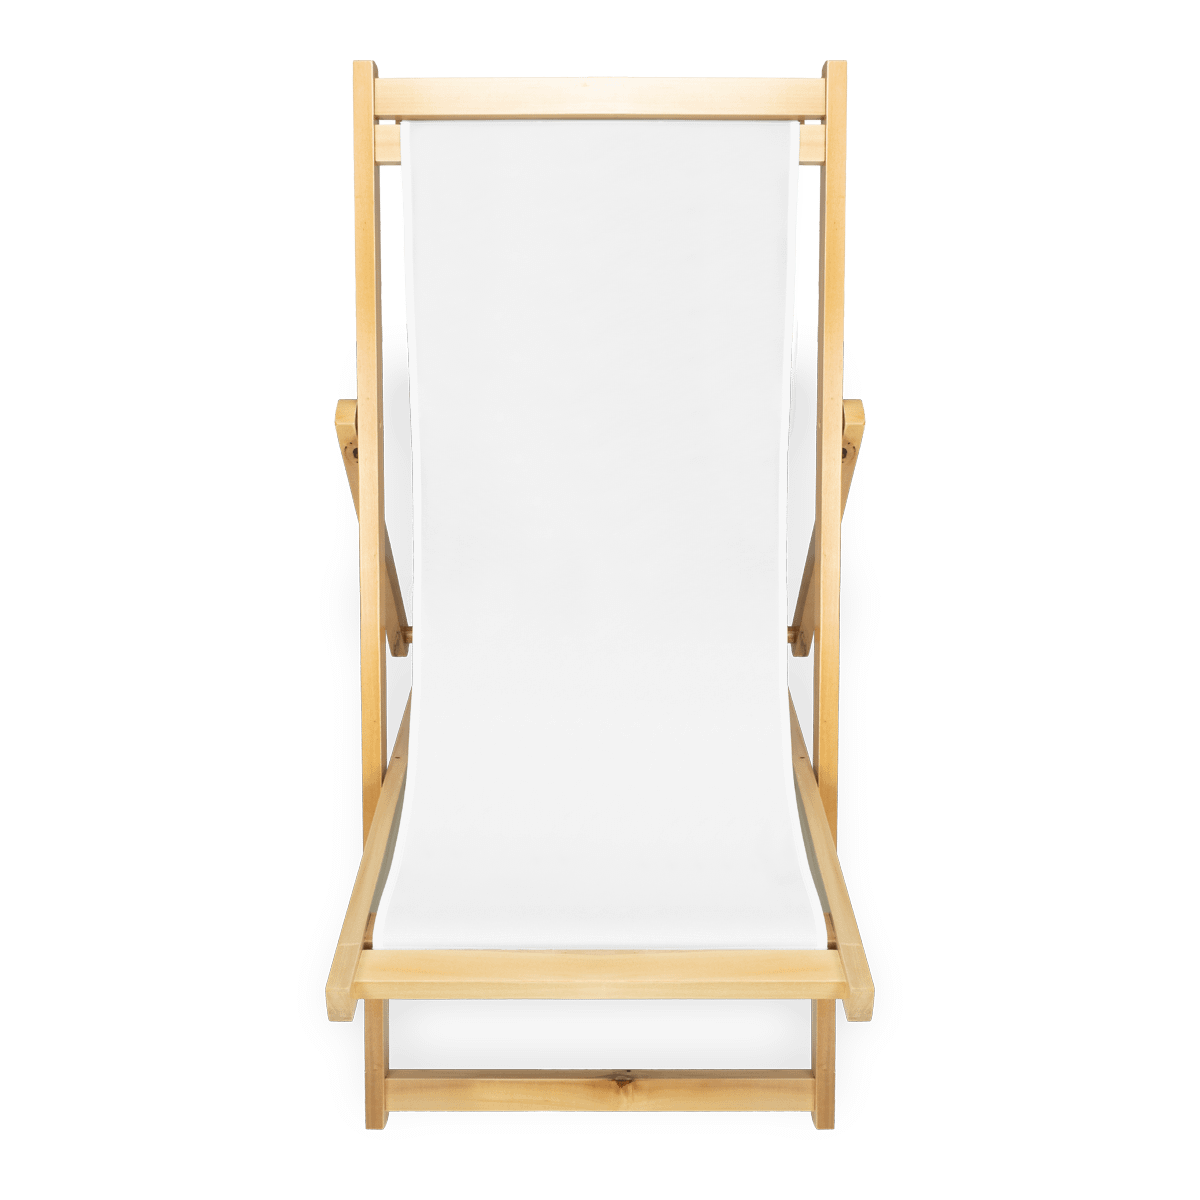 Folding Lounge Chair - Wooden Frame 